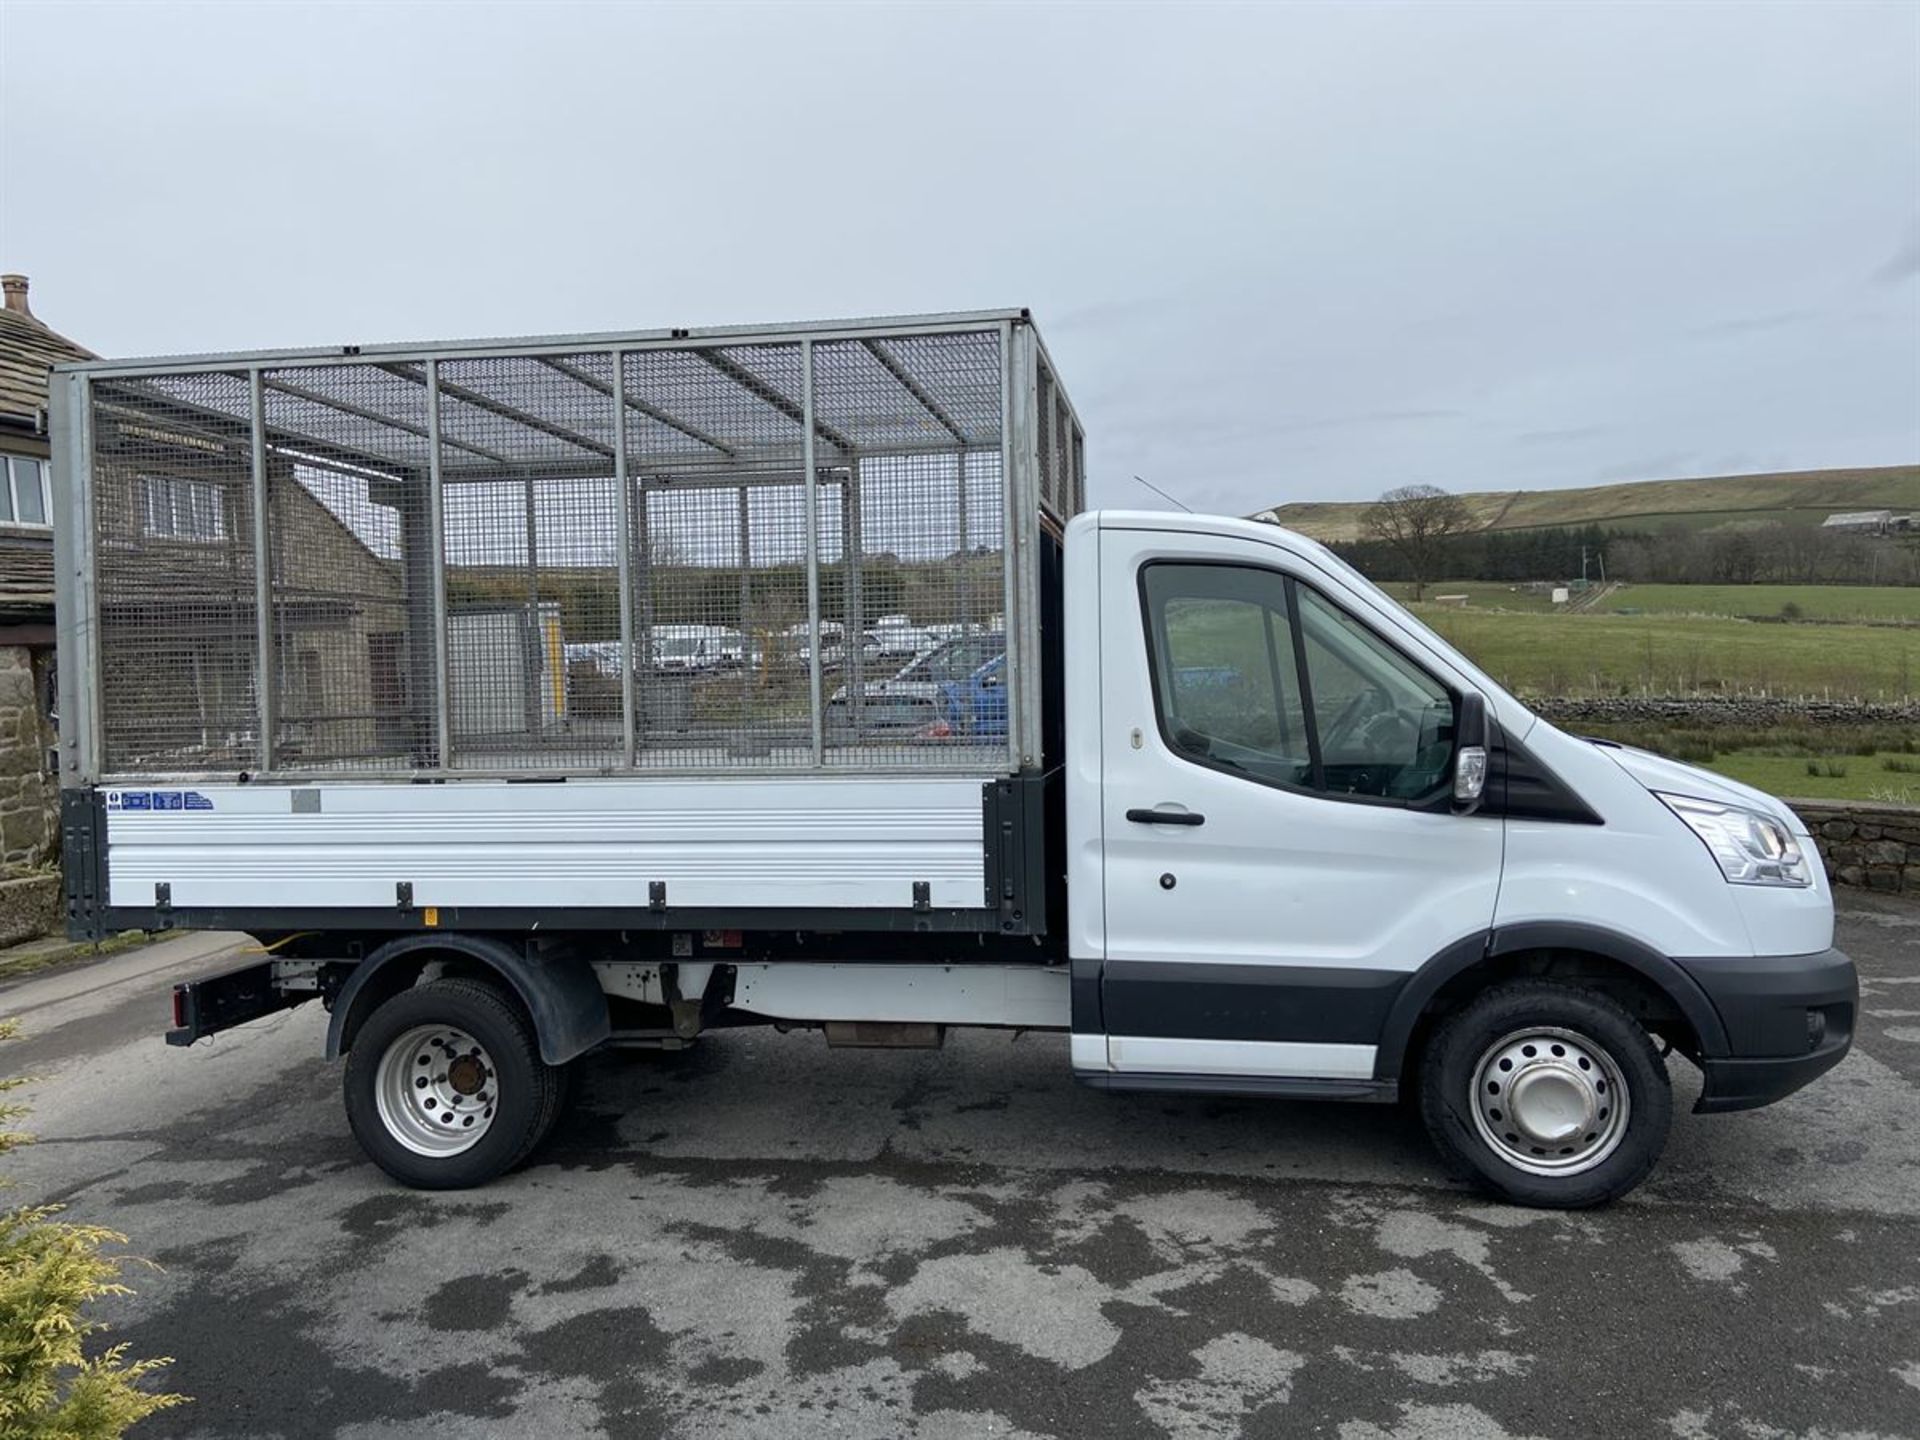 2015/65 FORD TRANSIT 350 TIPPER L2 DIESEL RWD 2.2 TDCI 125PS CHASSIS CAB (2198 cc) - Image 2 of 11